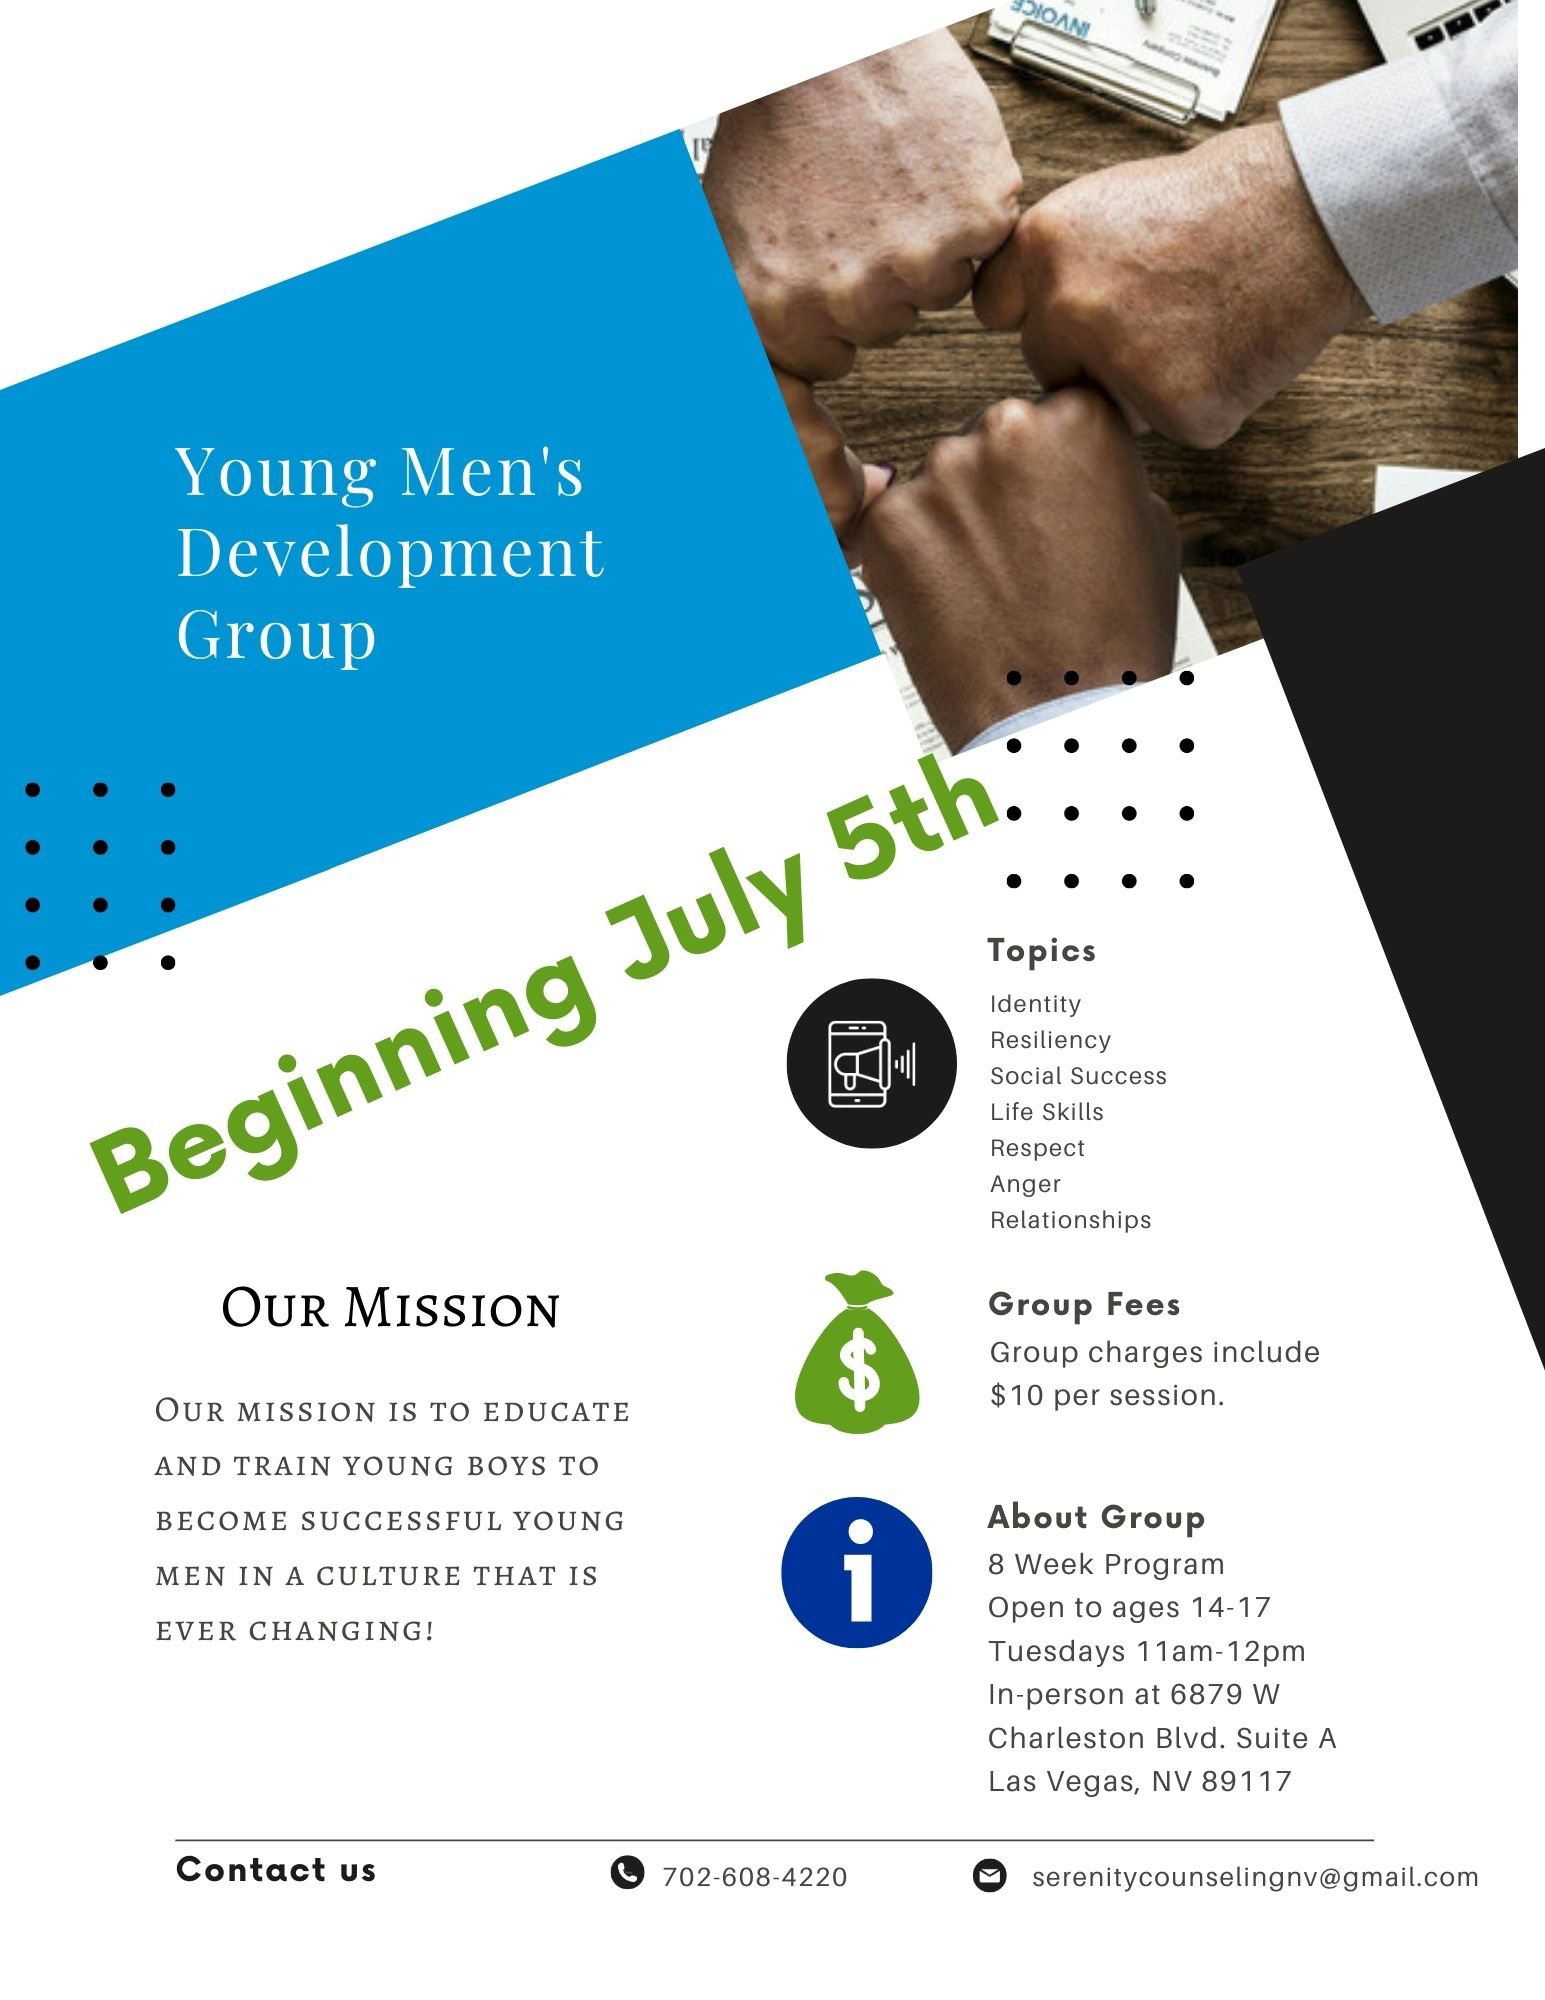 You Mens's Development Group - 8-Week Program, Open to Ages 14 - 17, Tuesdays 11 am - 12 pm, In-Person at 6879 W Charleston Blvd, Suite A, Las Vegas, NV 89117